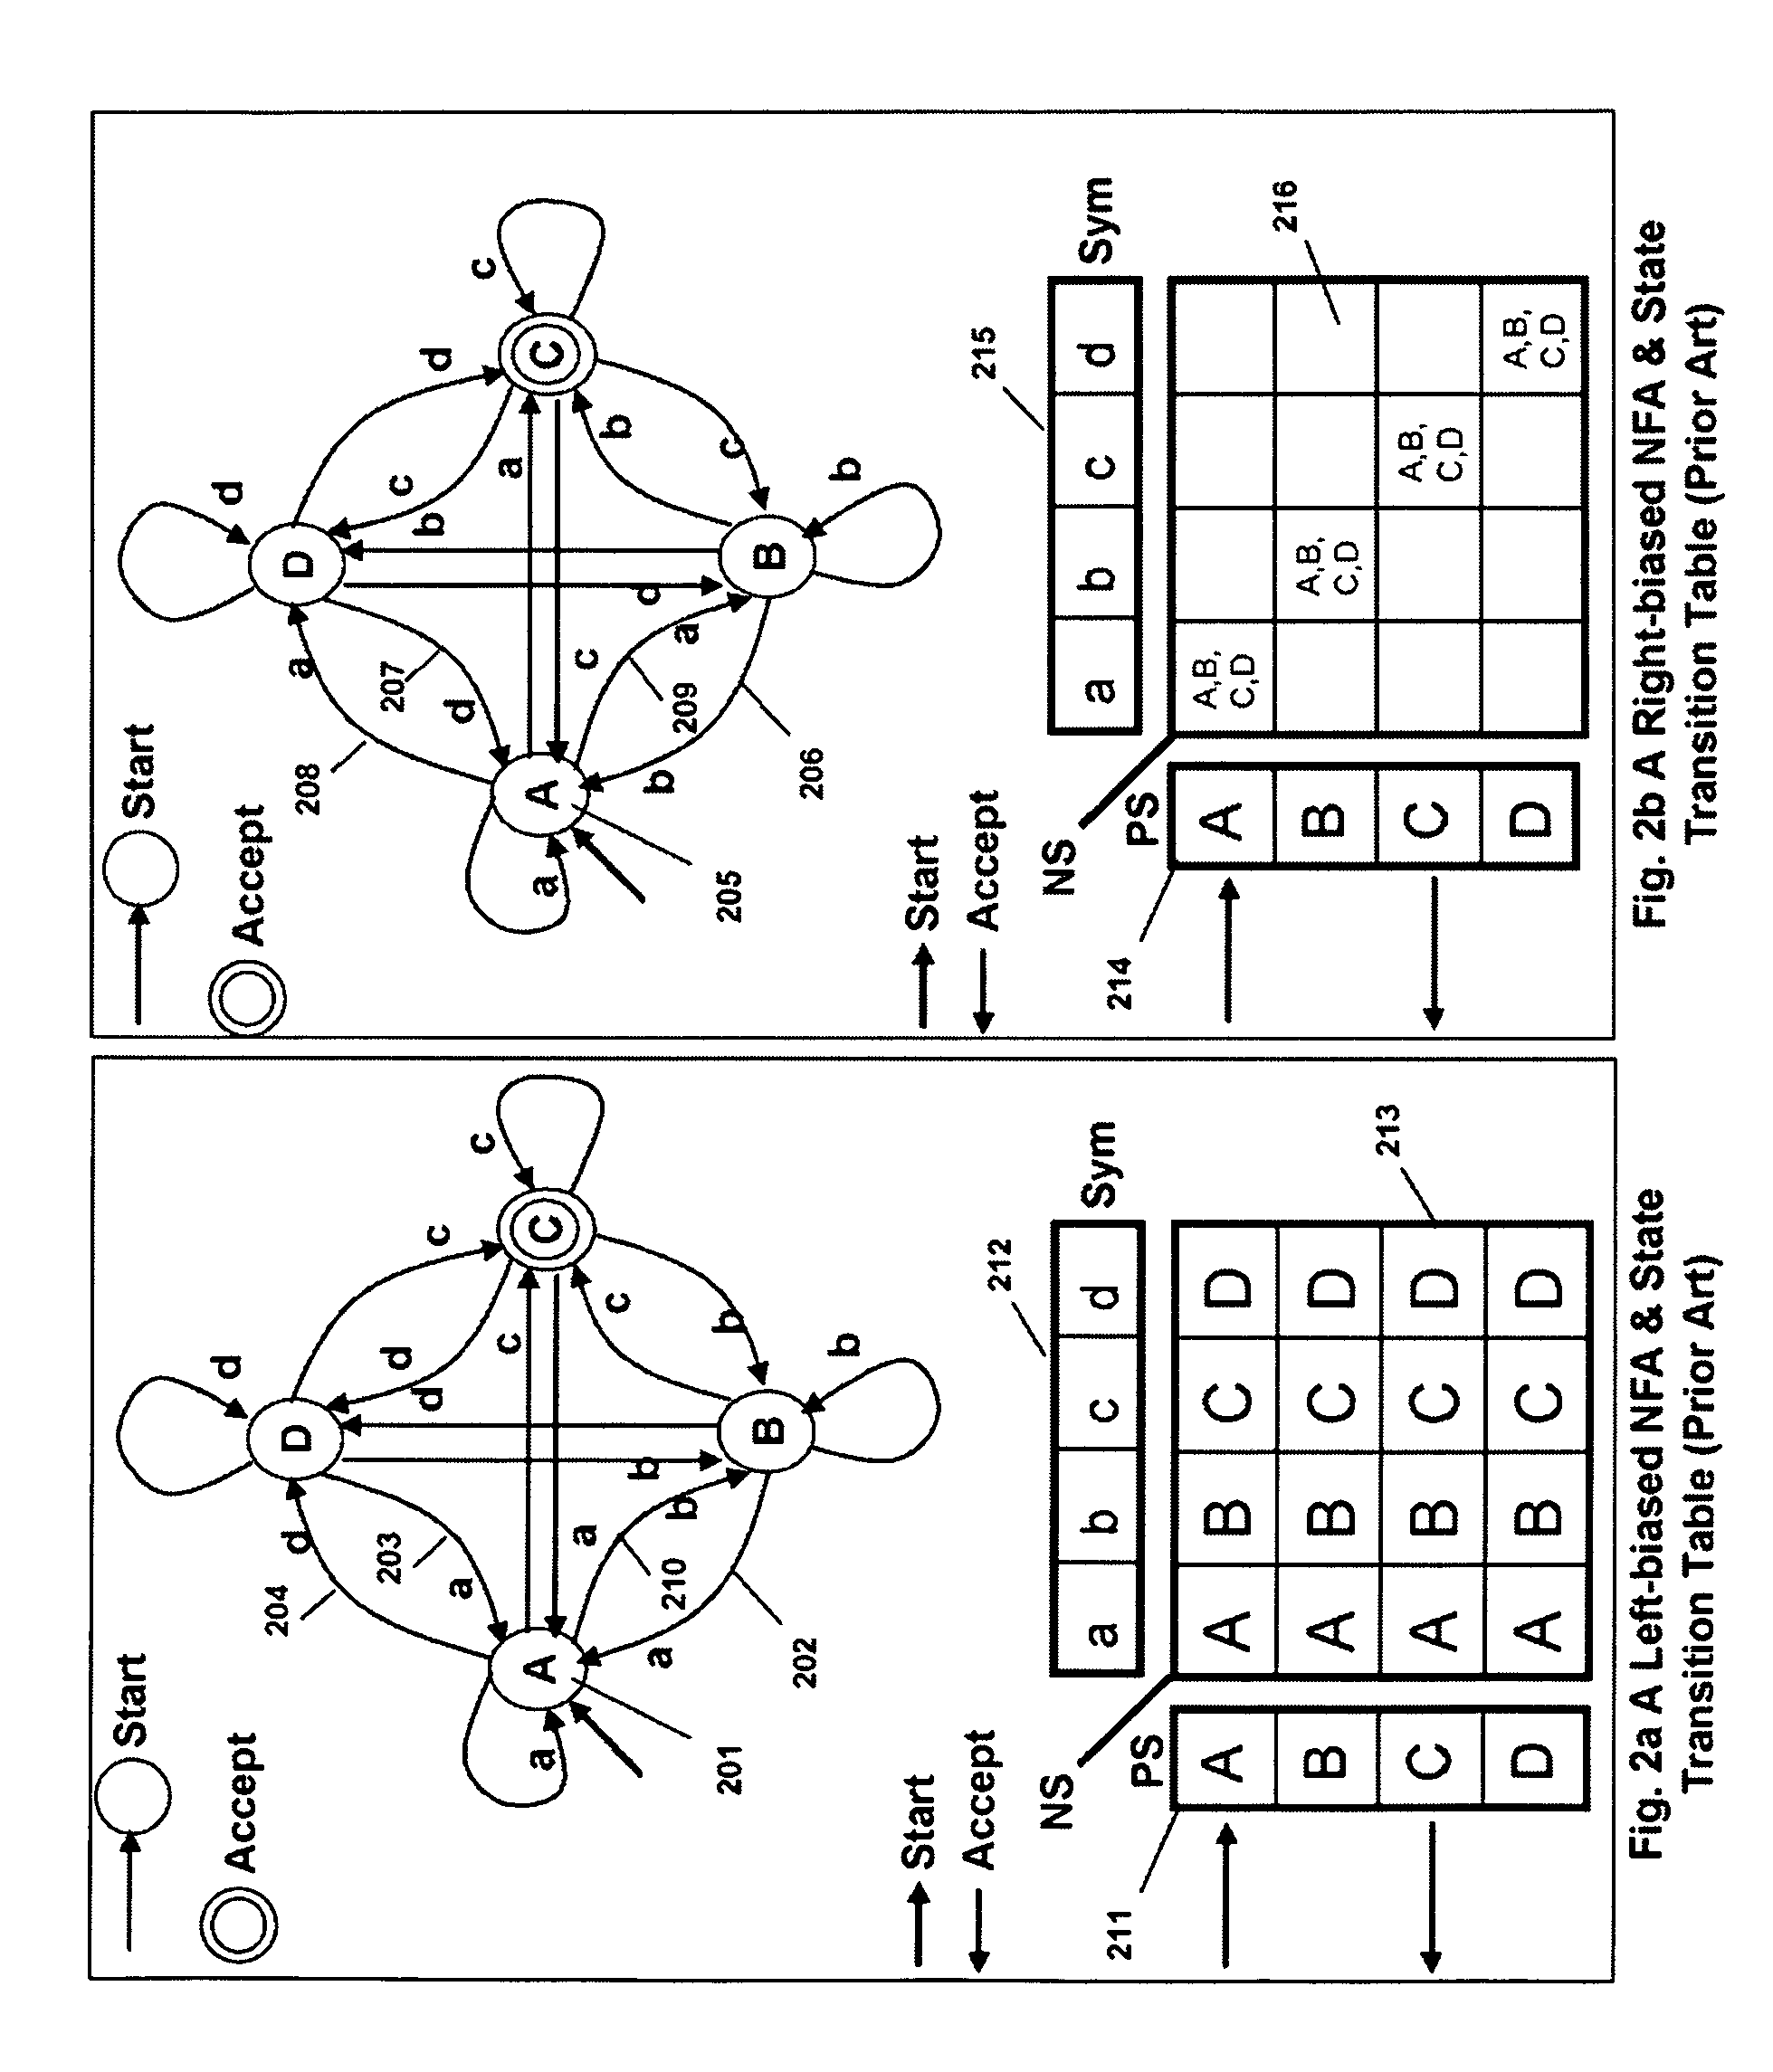 FSA Context Switch Architecture for Programmable Intelligent Search Memory